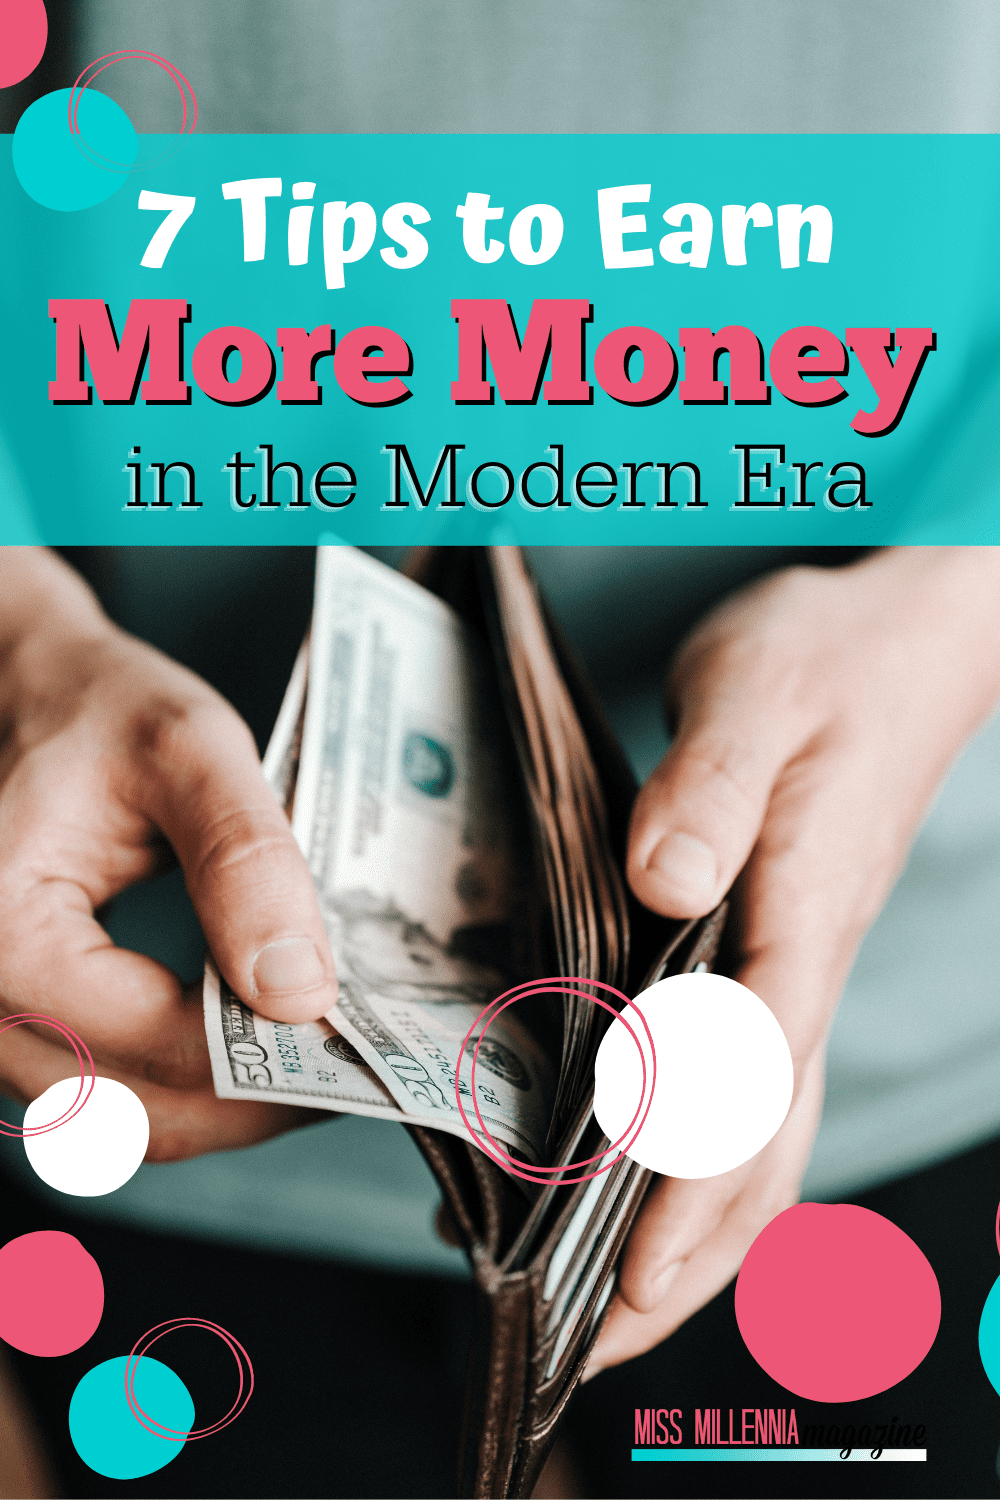 7 Tips to Earn More Money in the Modern Era